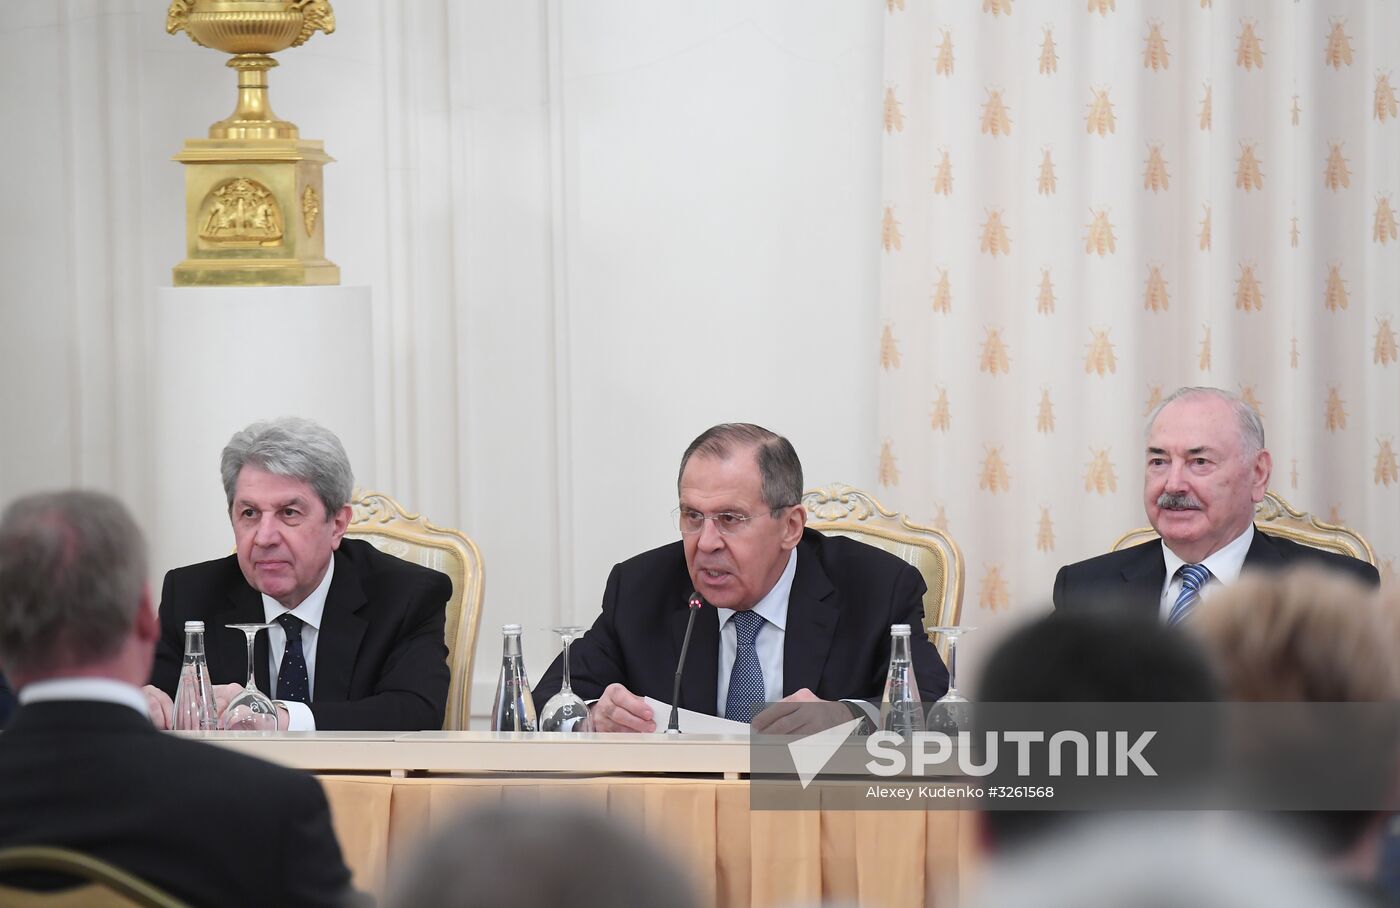 Meeting of Commission for UNESCO involving Foreign Minister Sergei Lavrov